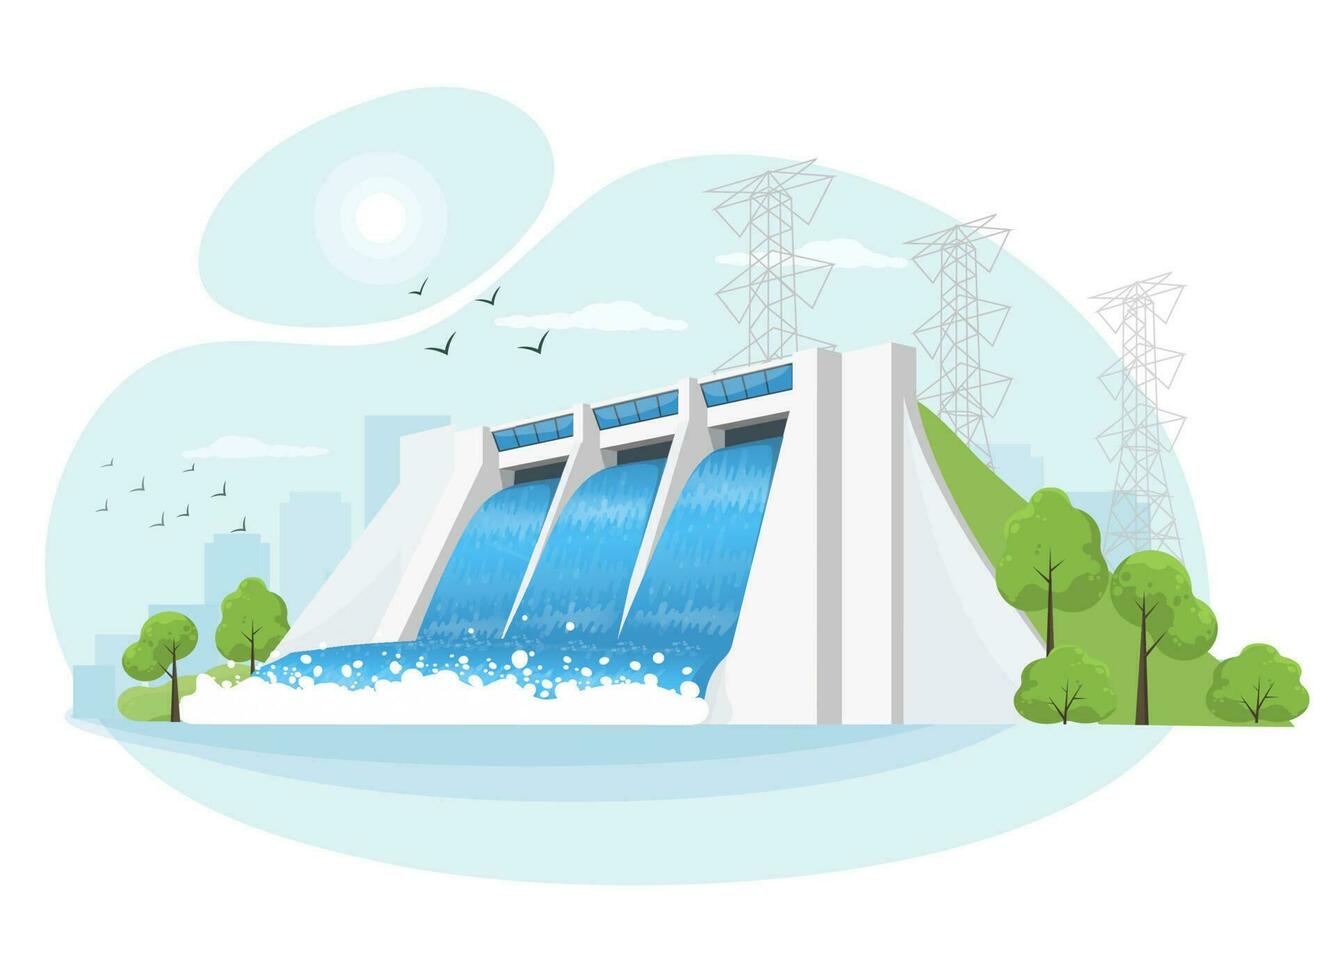 Hydroelectric clean power plant station factory. Renewable green sustainable hydropower energy generation with water flowing out reservoir dam. High-voltage power lines. I vector